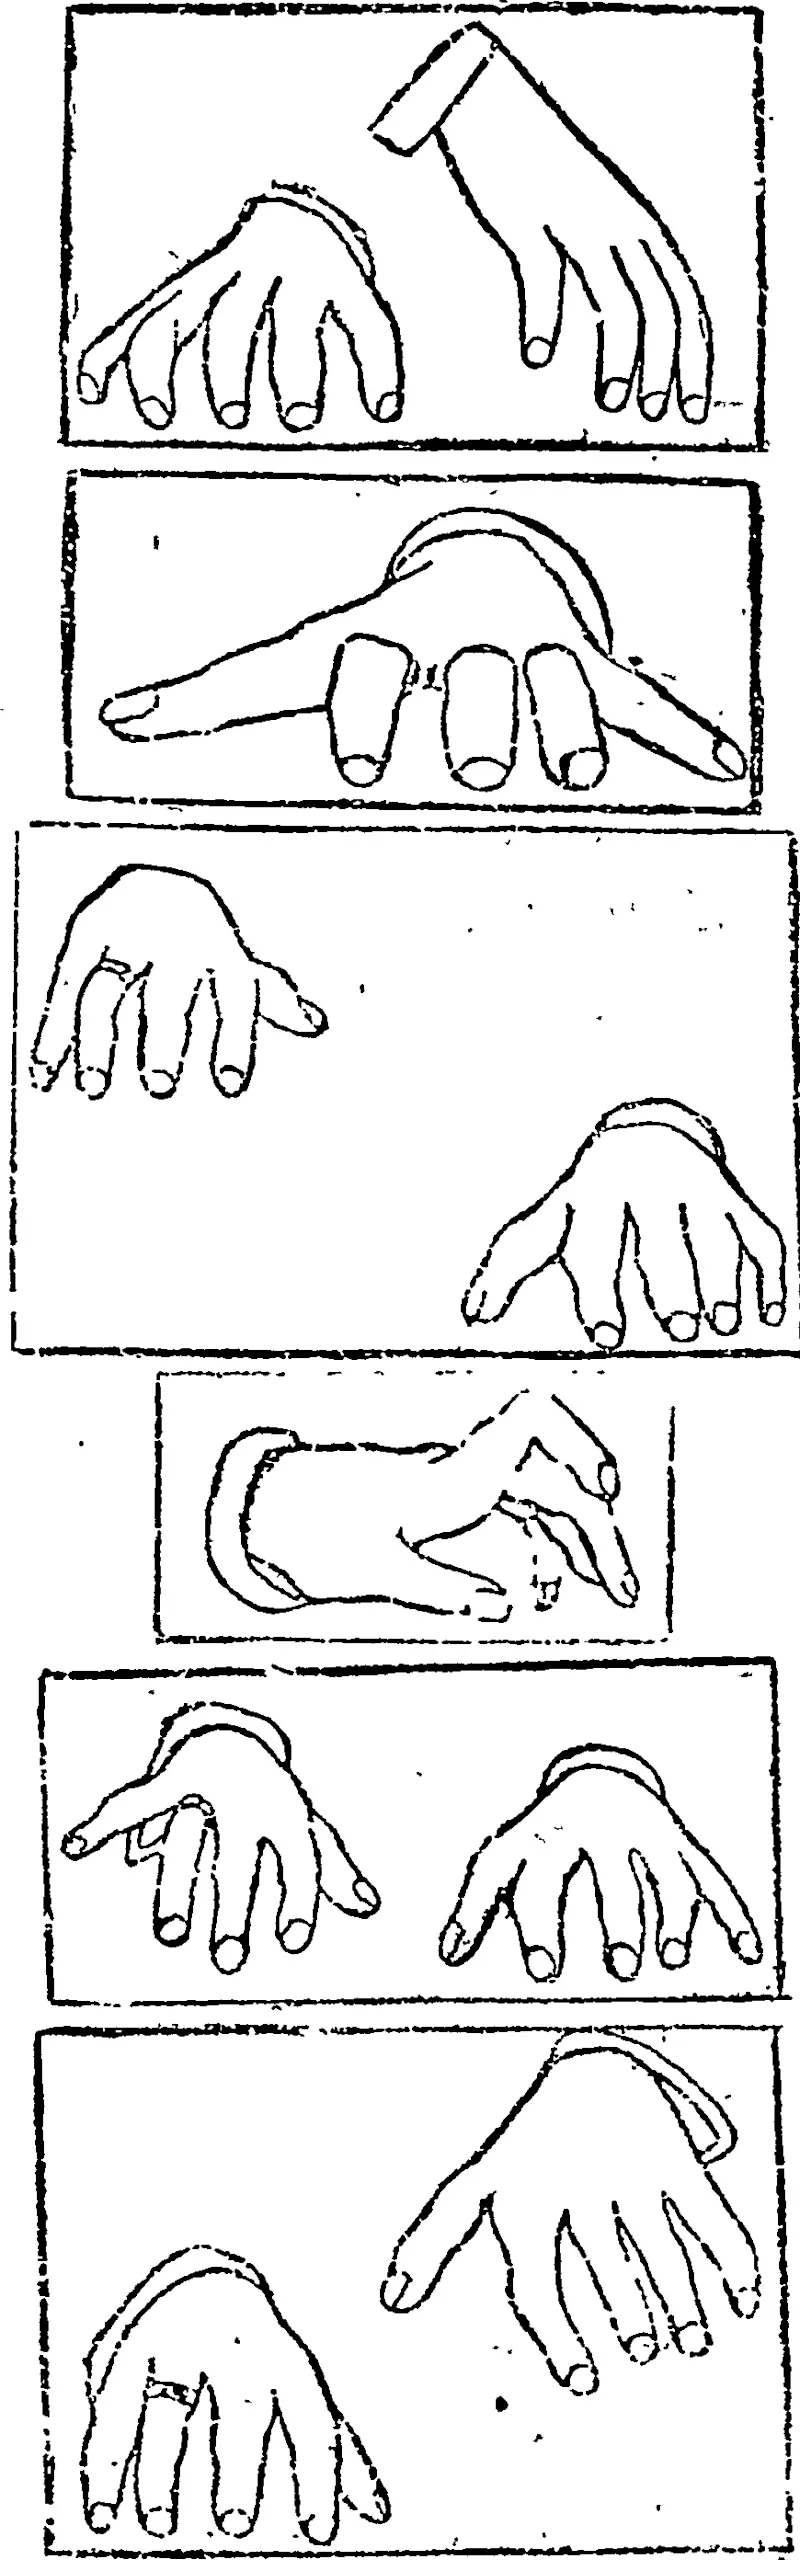 The first two diagrams represent the bands of Tausig and Liszt respectively ; the third Padercweki's; the fourth and fifth I'ubinstein's (the single hand) and Pachmann's ; the sixth Eosenthal's., (Otago Witness, 14 December 1899)